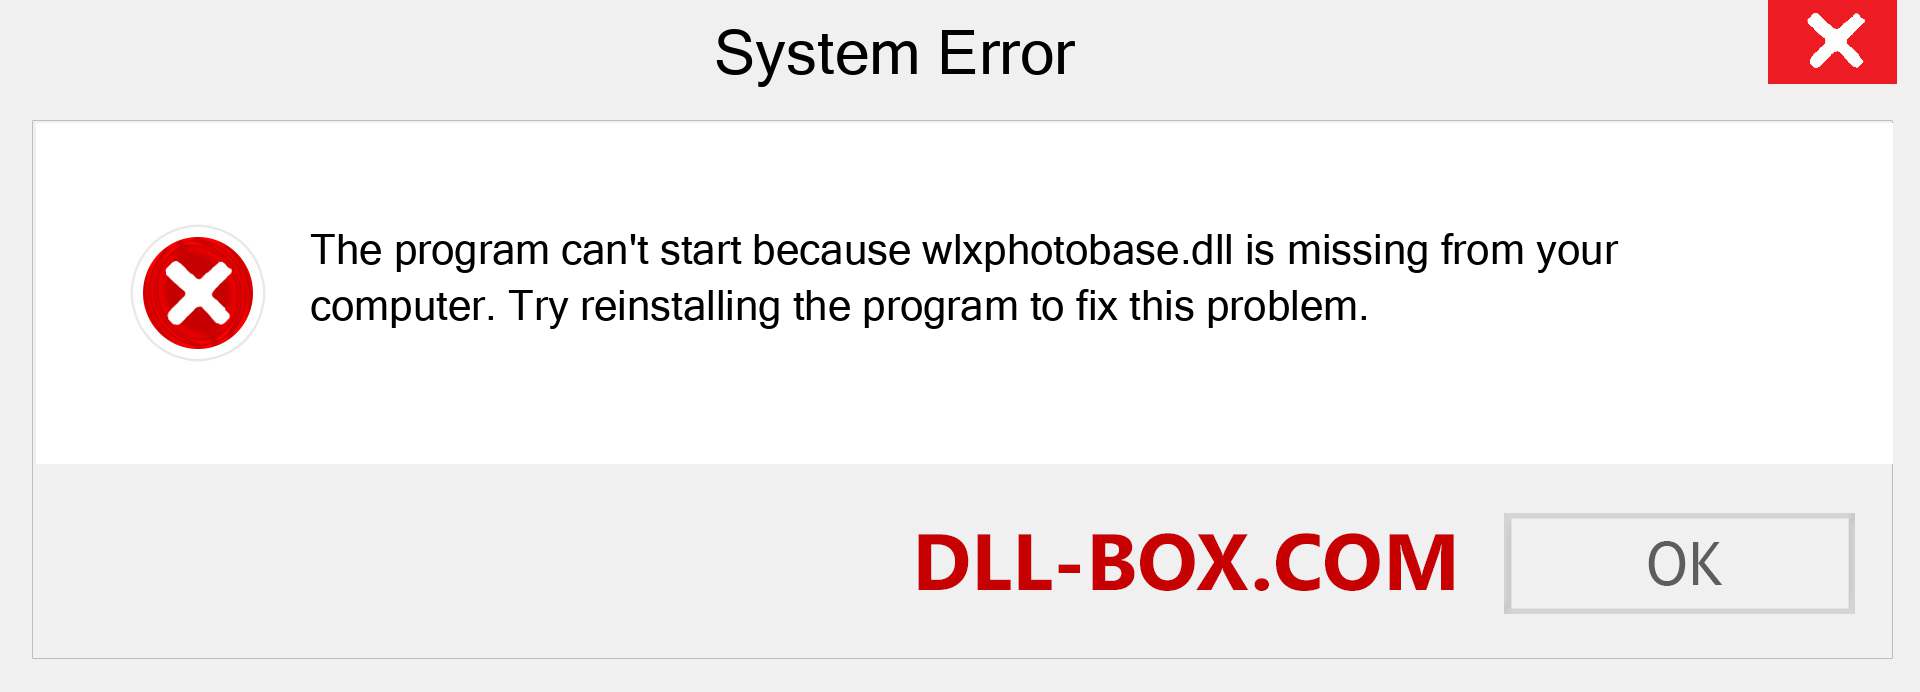  wlxphotobase.dll file is missing?. Download for Windows 7, 8, 10 - Fix  wlxphotobase dll Missing Error on Windows, photos, images